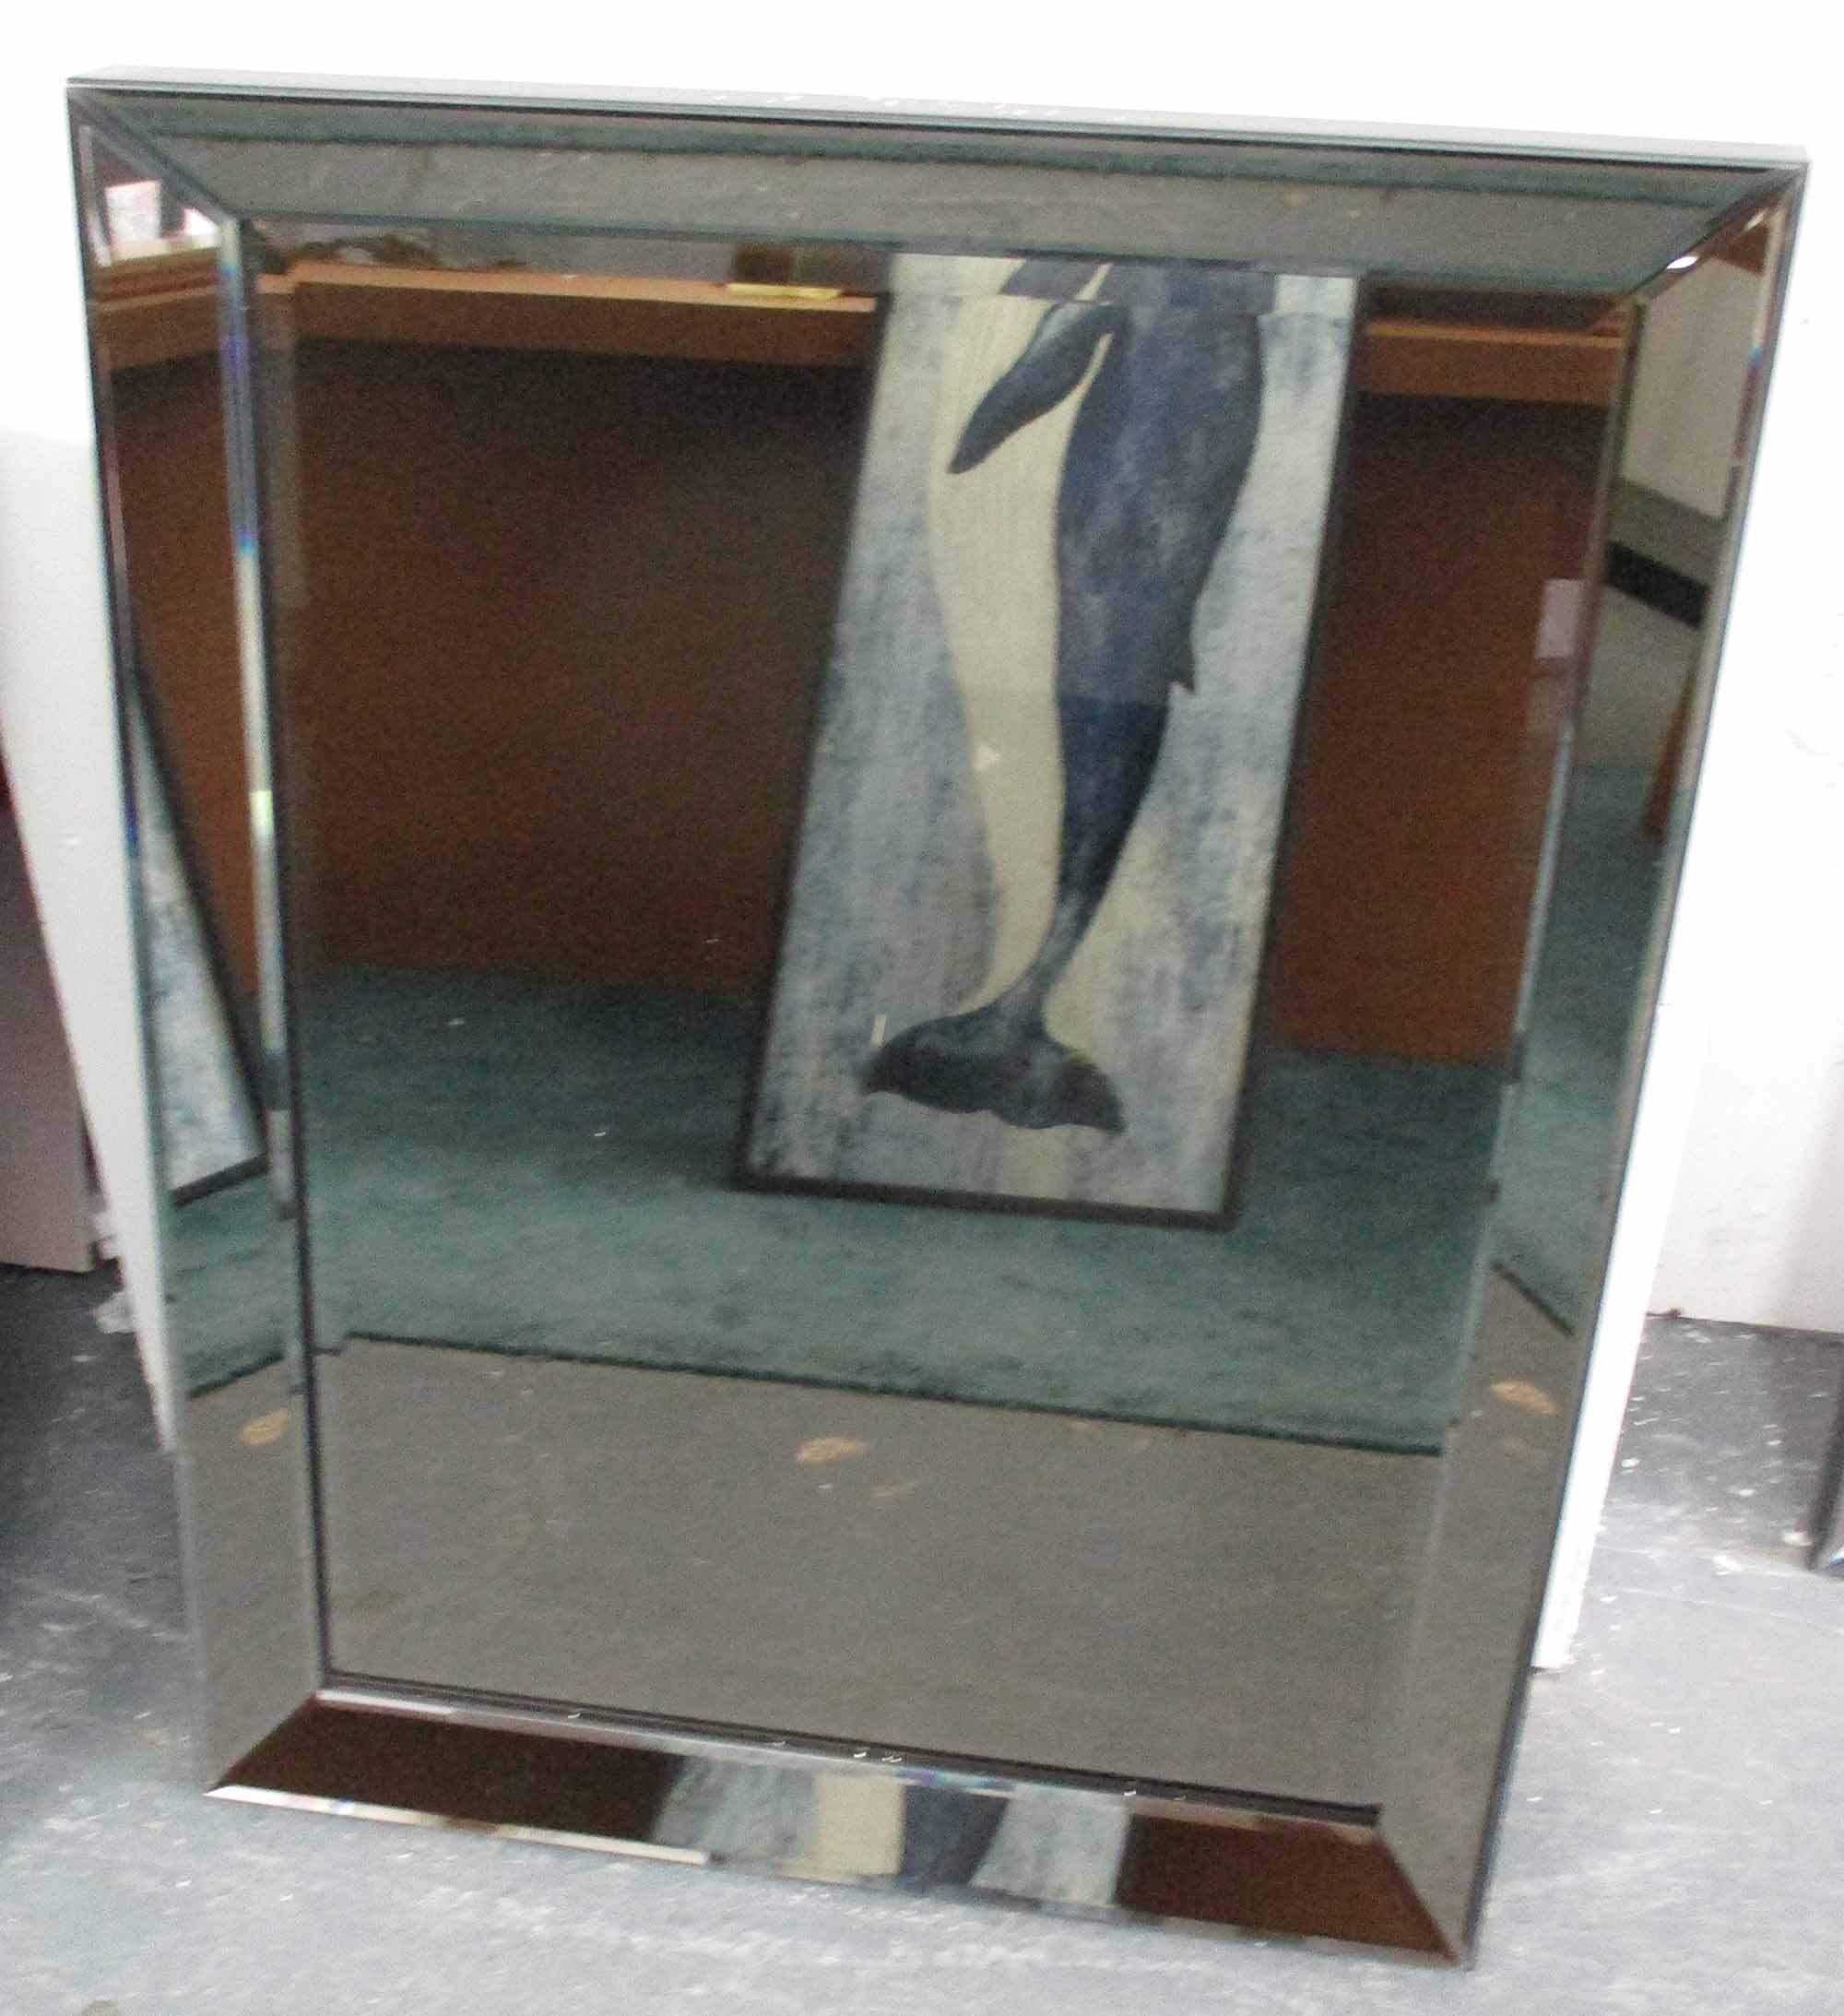 MIRROR, bevelled, in a smoky glass with mirrored edges, 90cm x 70cm.